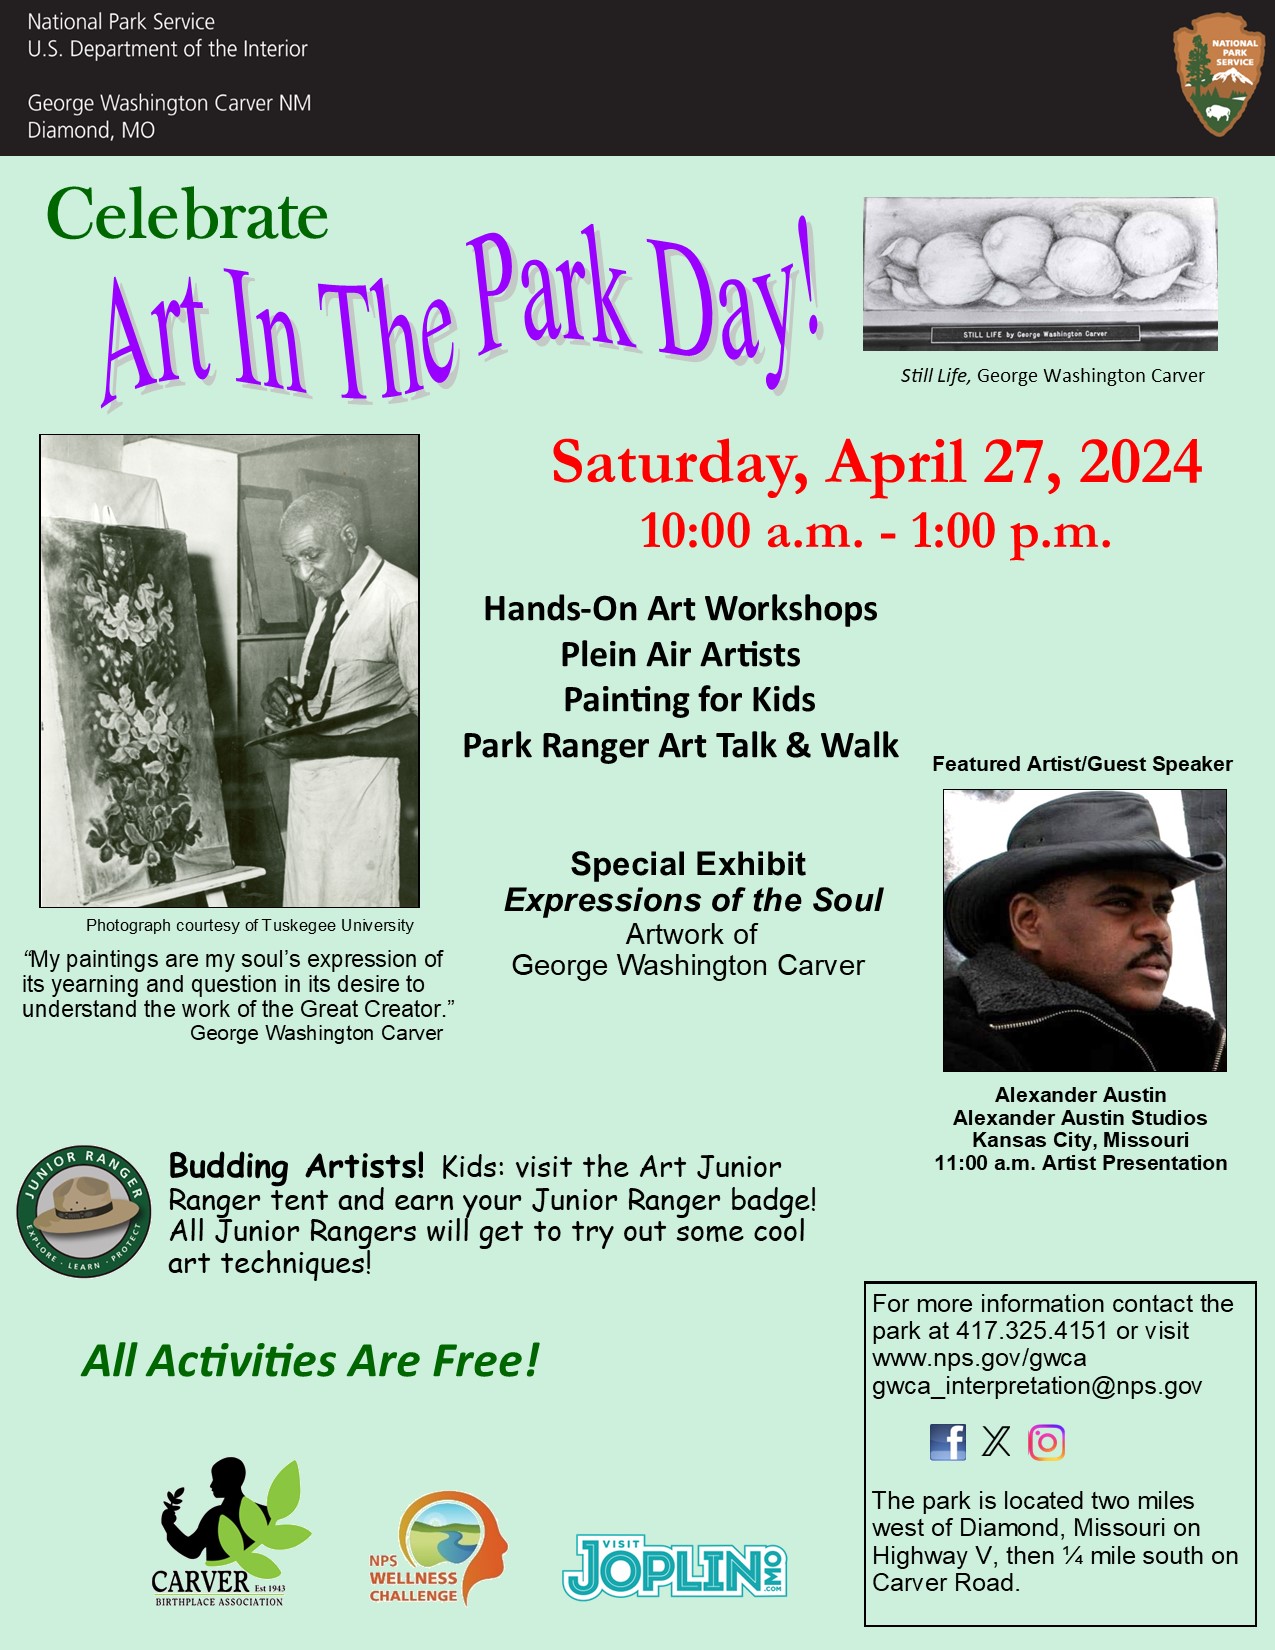 Infographic for Art in the Park. A black and white photograph of George Washington paint and a headshot of a man wearing a black cowboy hat.